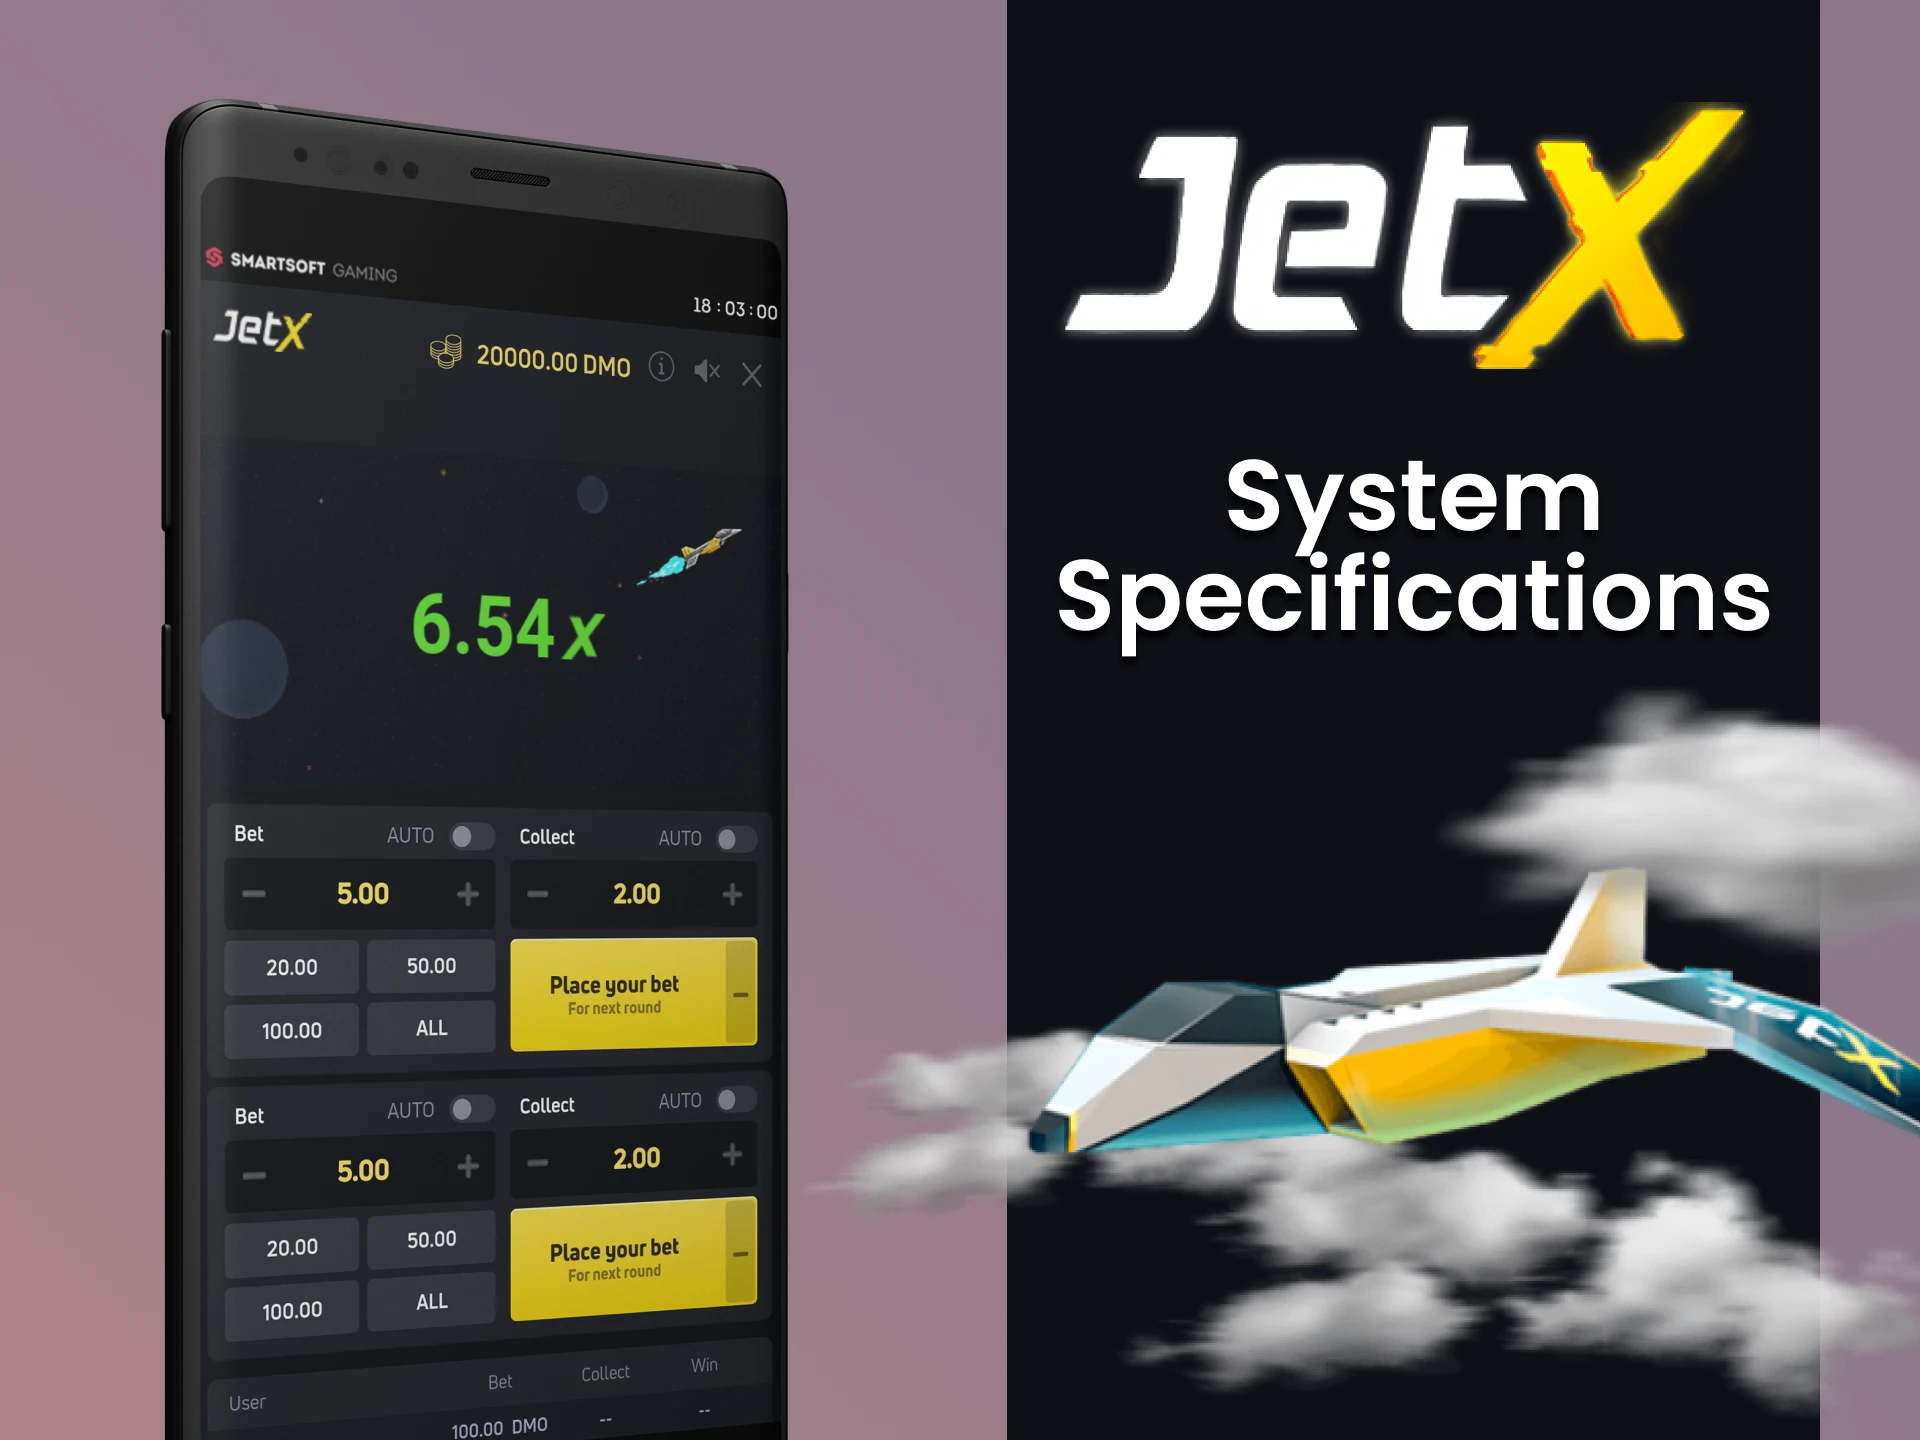 We will talk about the characteristics of the phone for playing JetX.